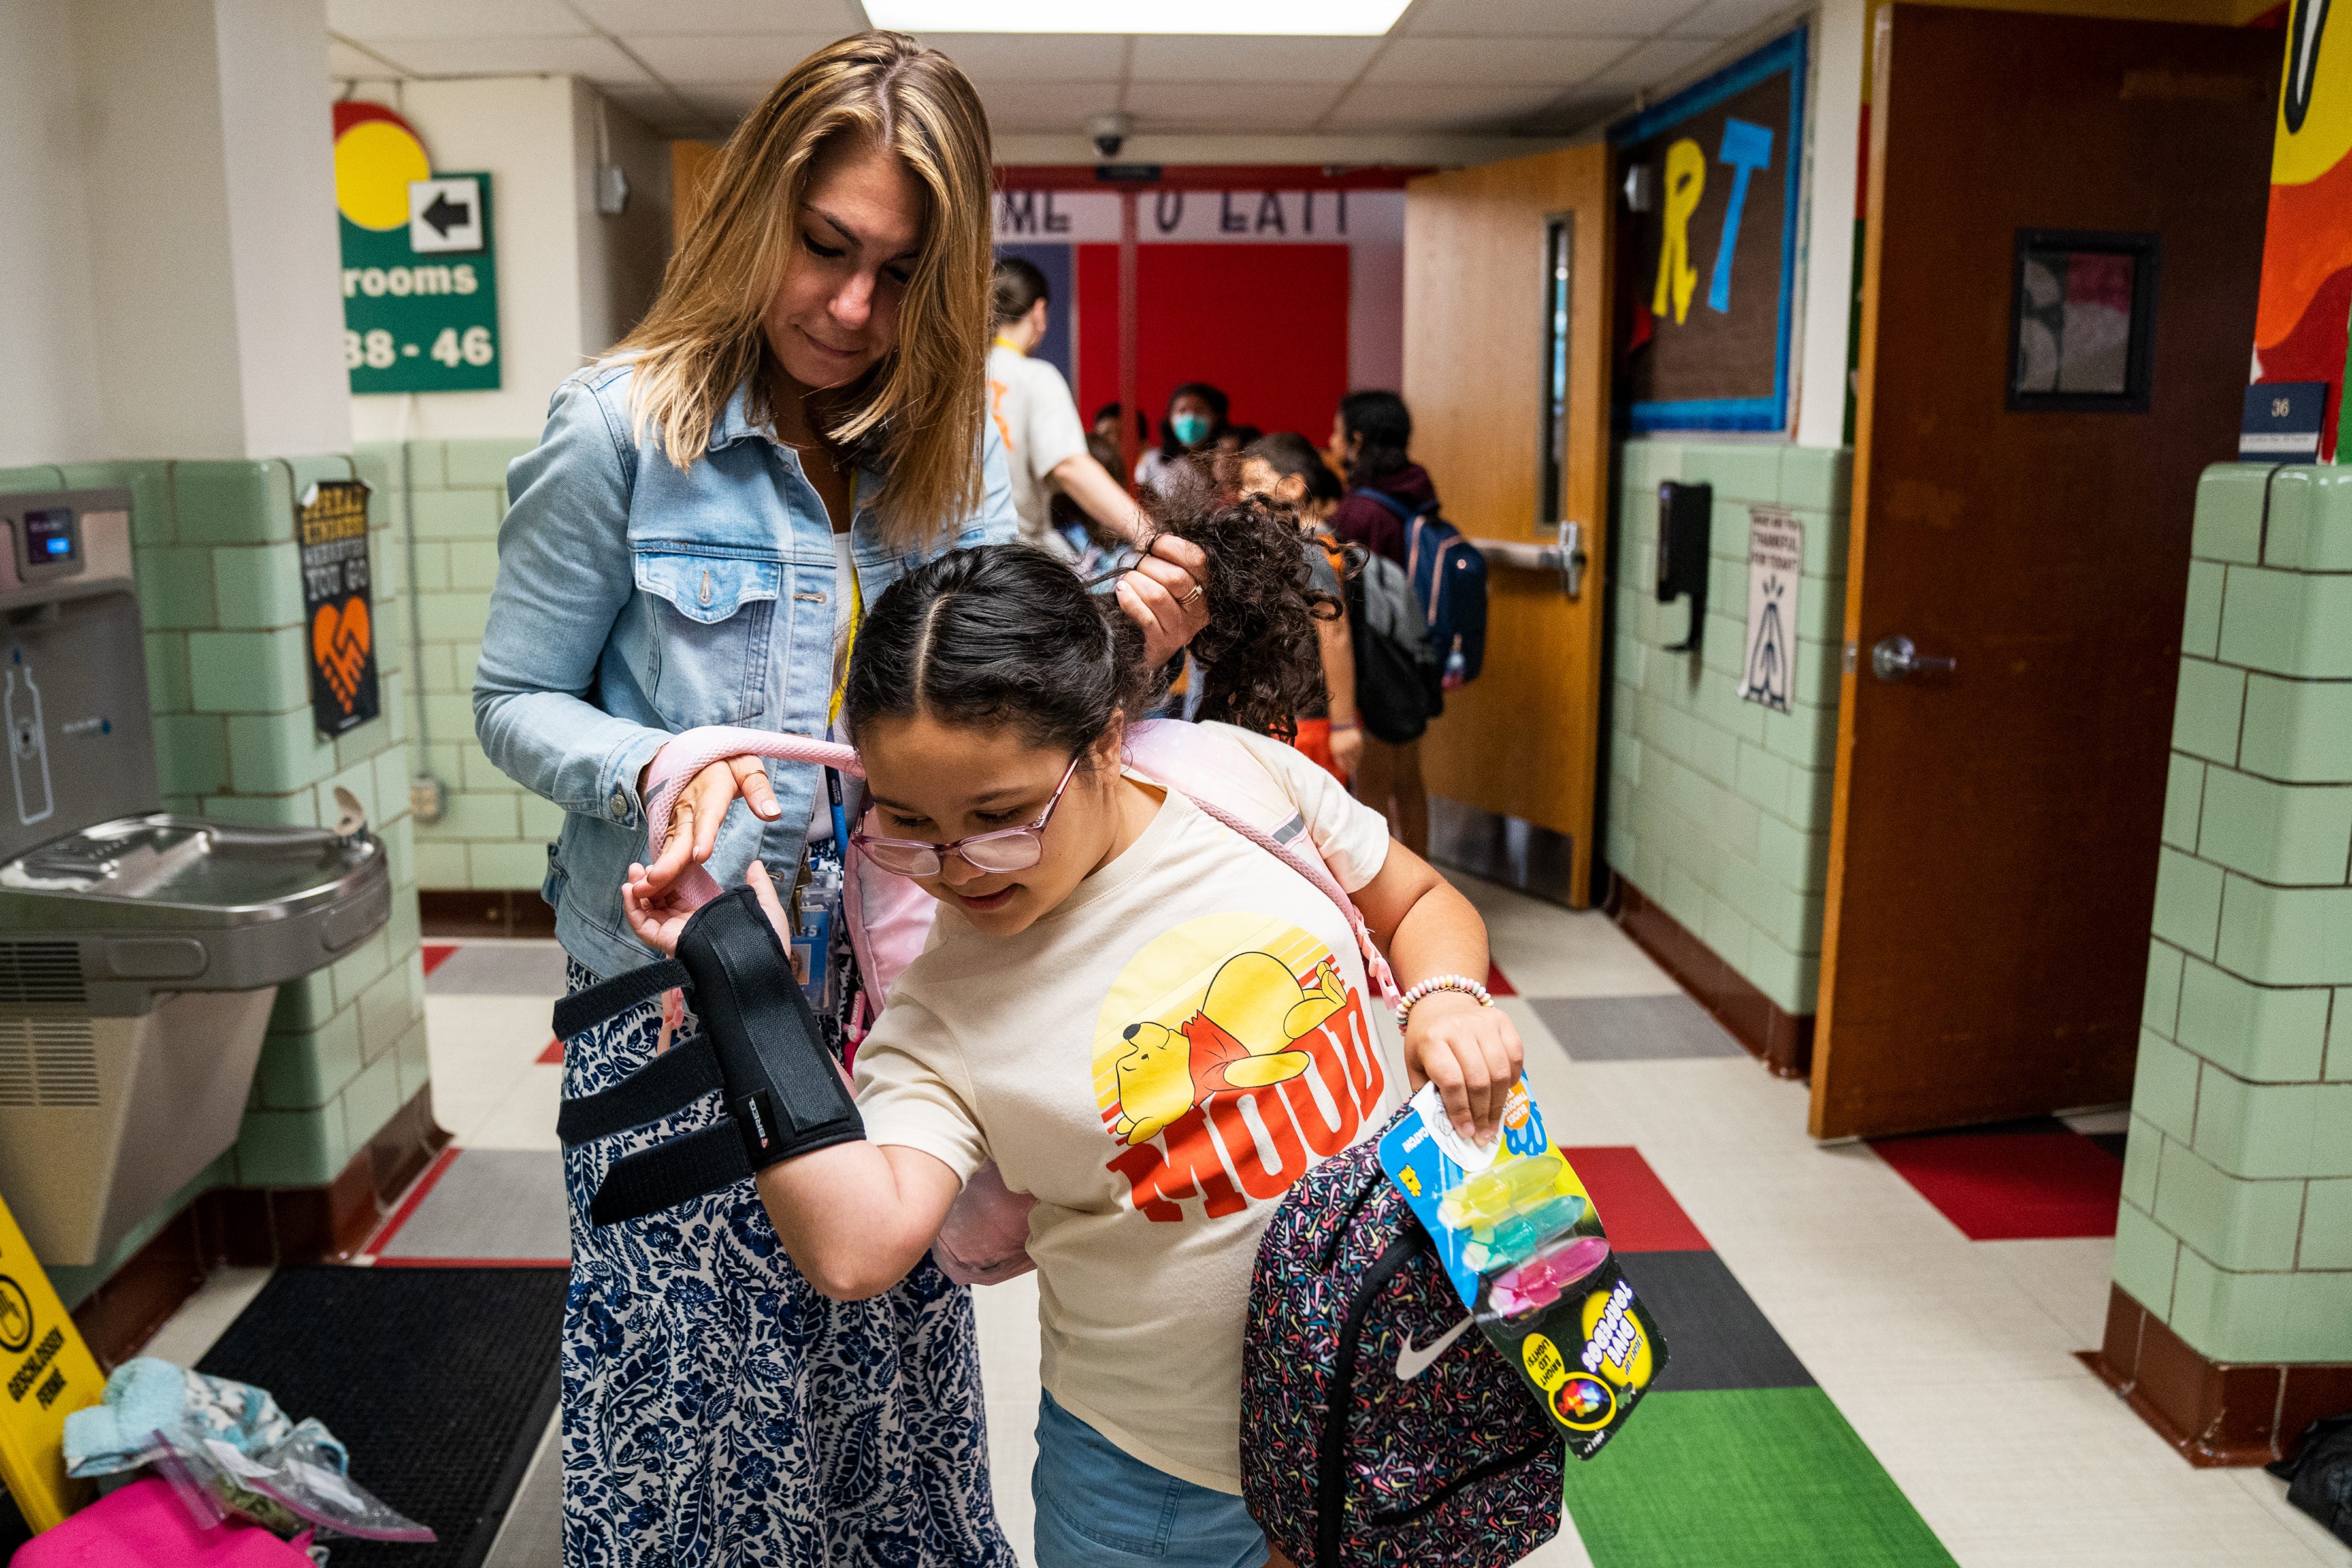 Ashley Soto, a third grader at Cora Kelly Elementary in Alexandria, Va., gets help with her backpack from teacher Daisy Andonyadis.